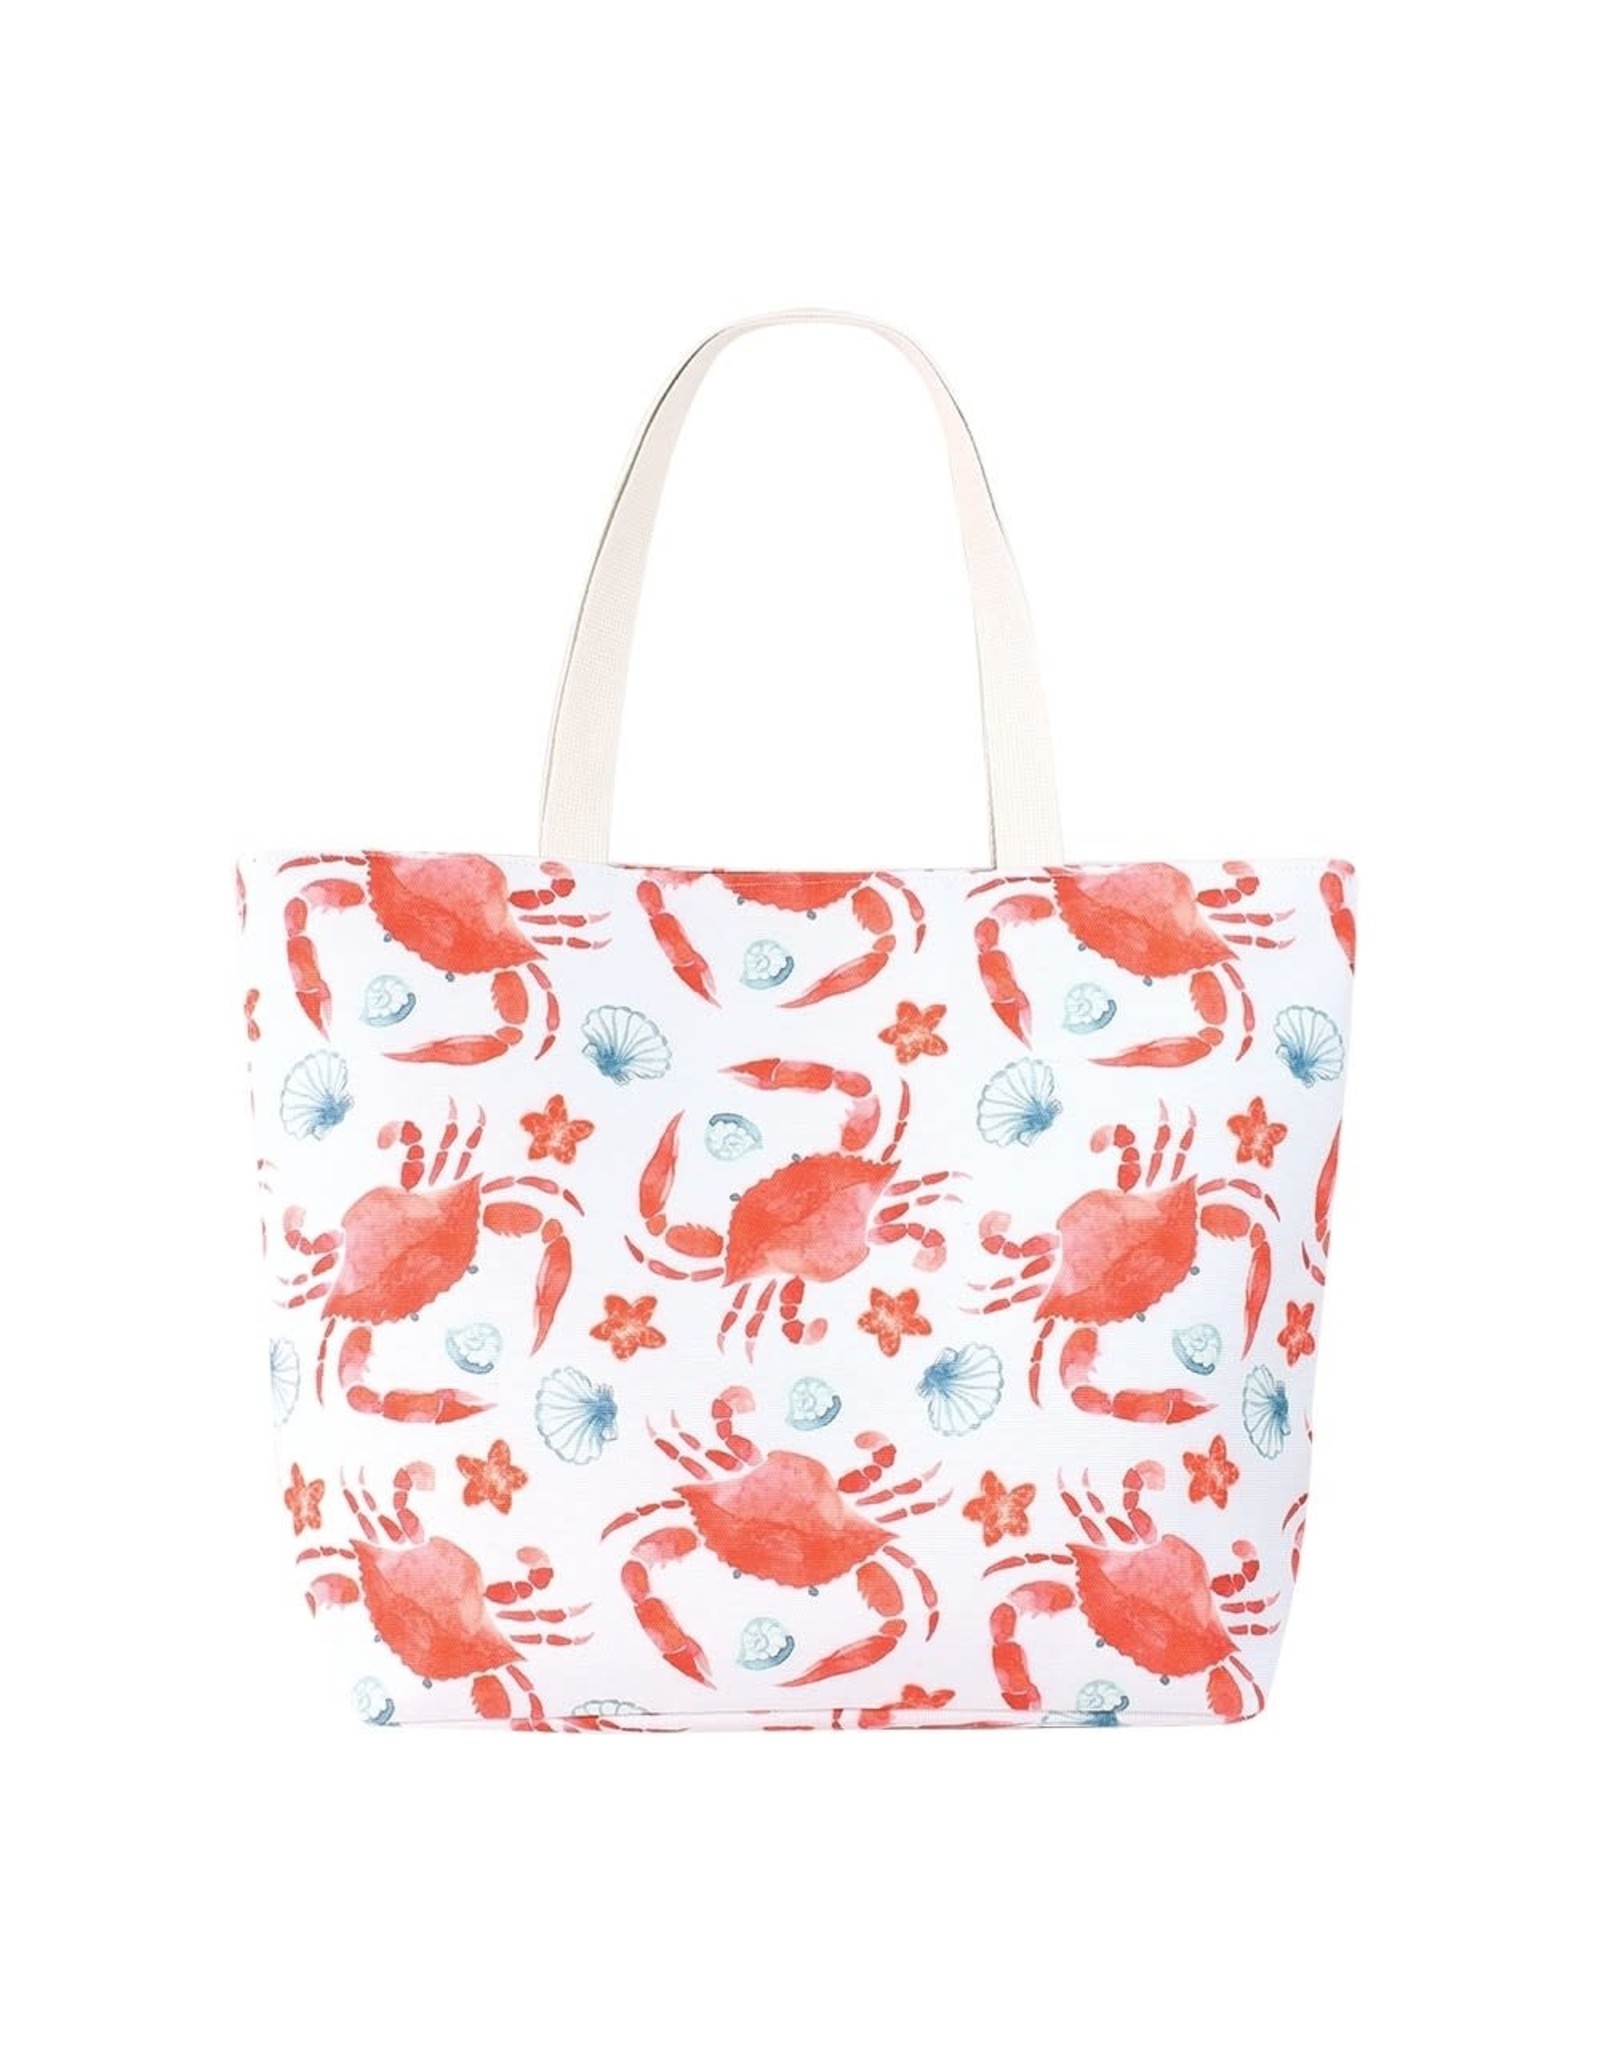 Periwinkle by Barlow Tote Bags Crabs And Scallop Shells Tote